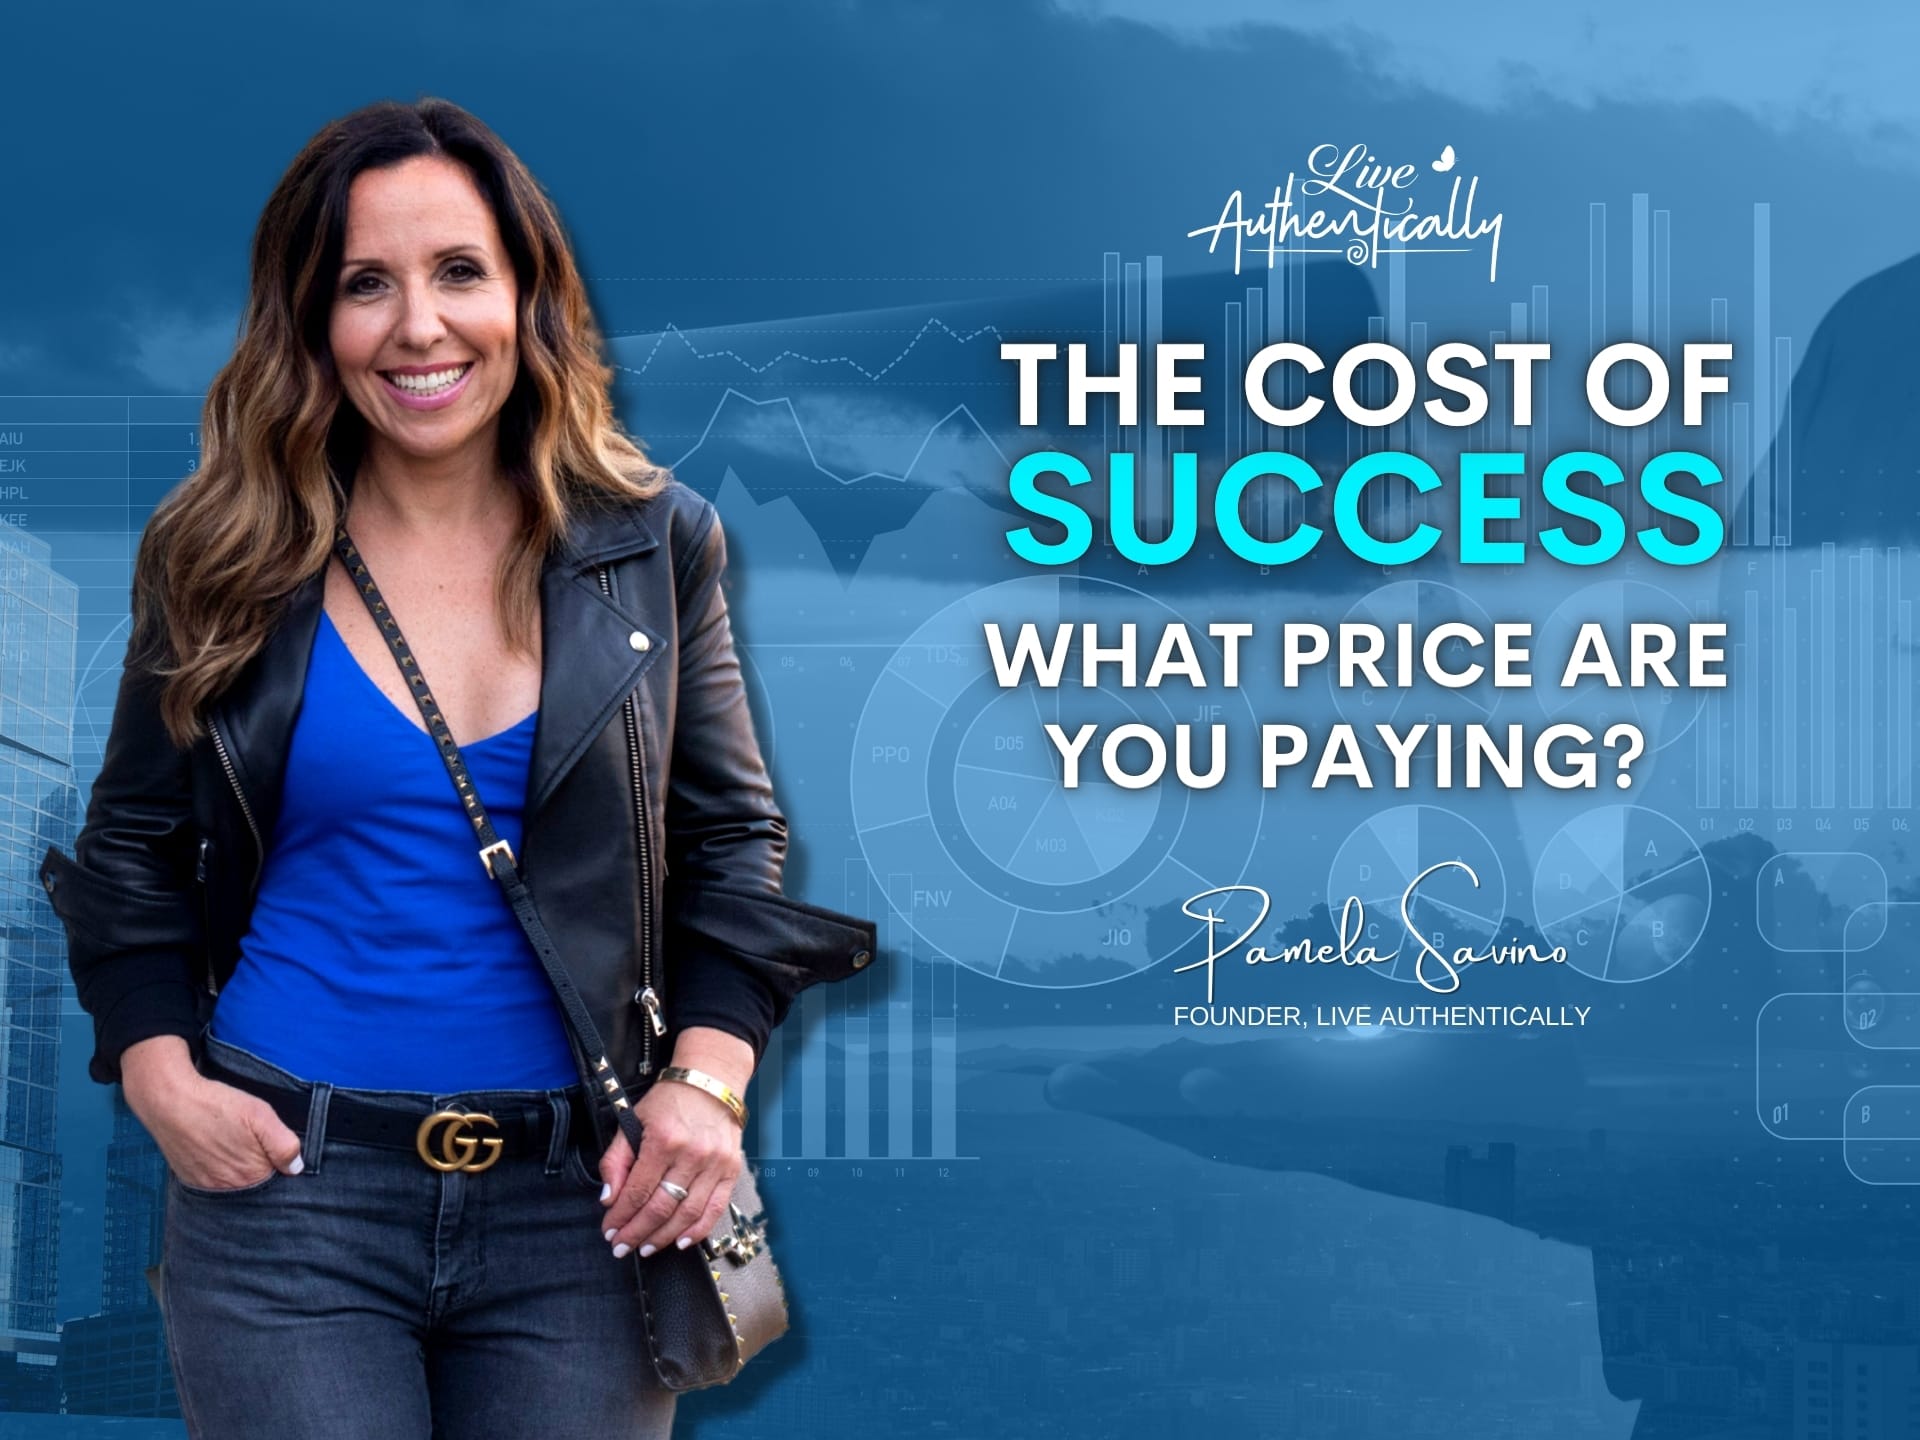 The Cost of Success. What Price Are You Paying?